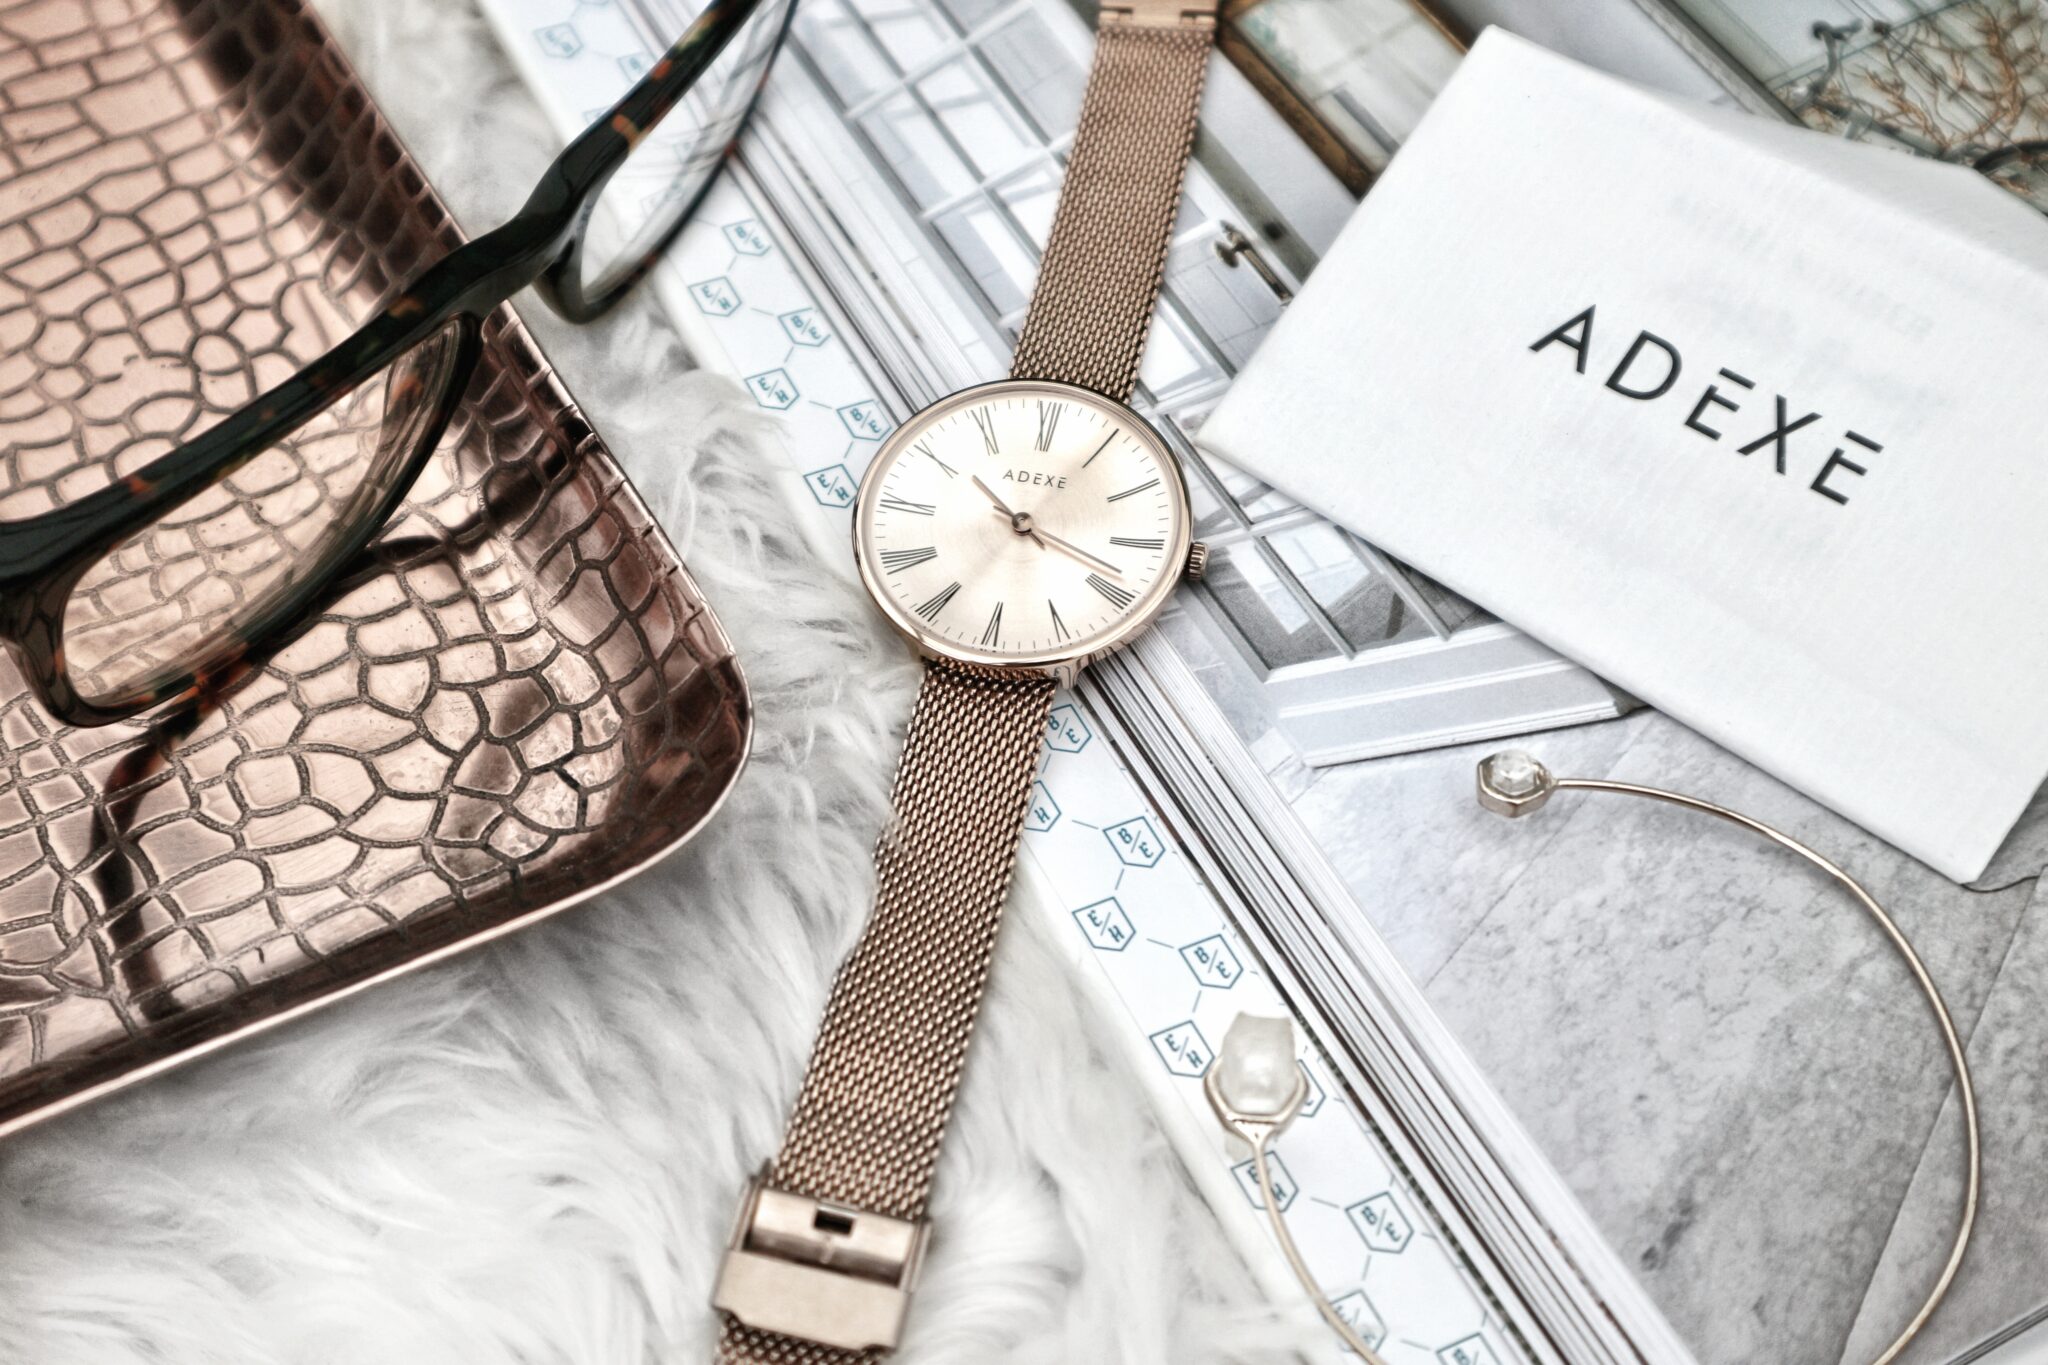 Timeless Style with Adexe Watches